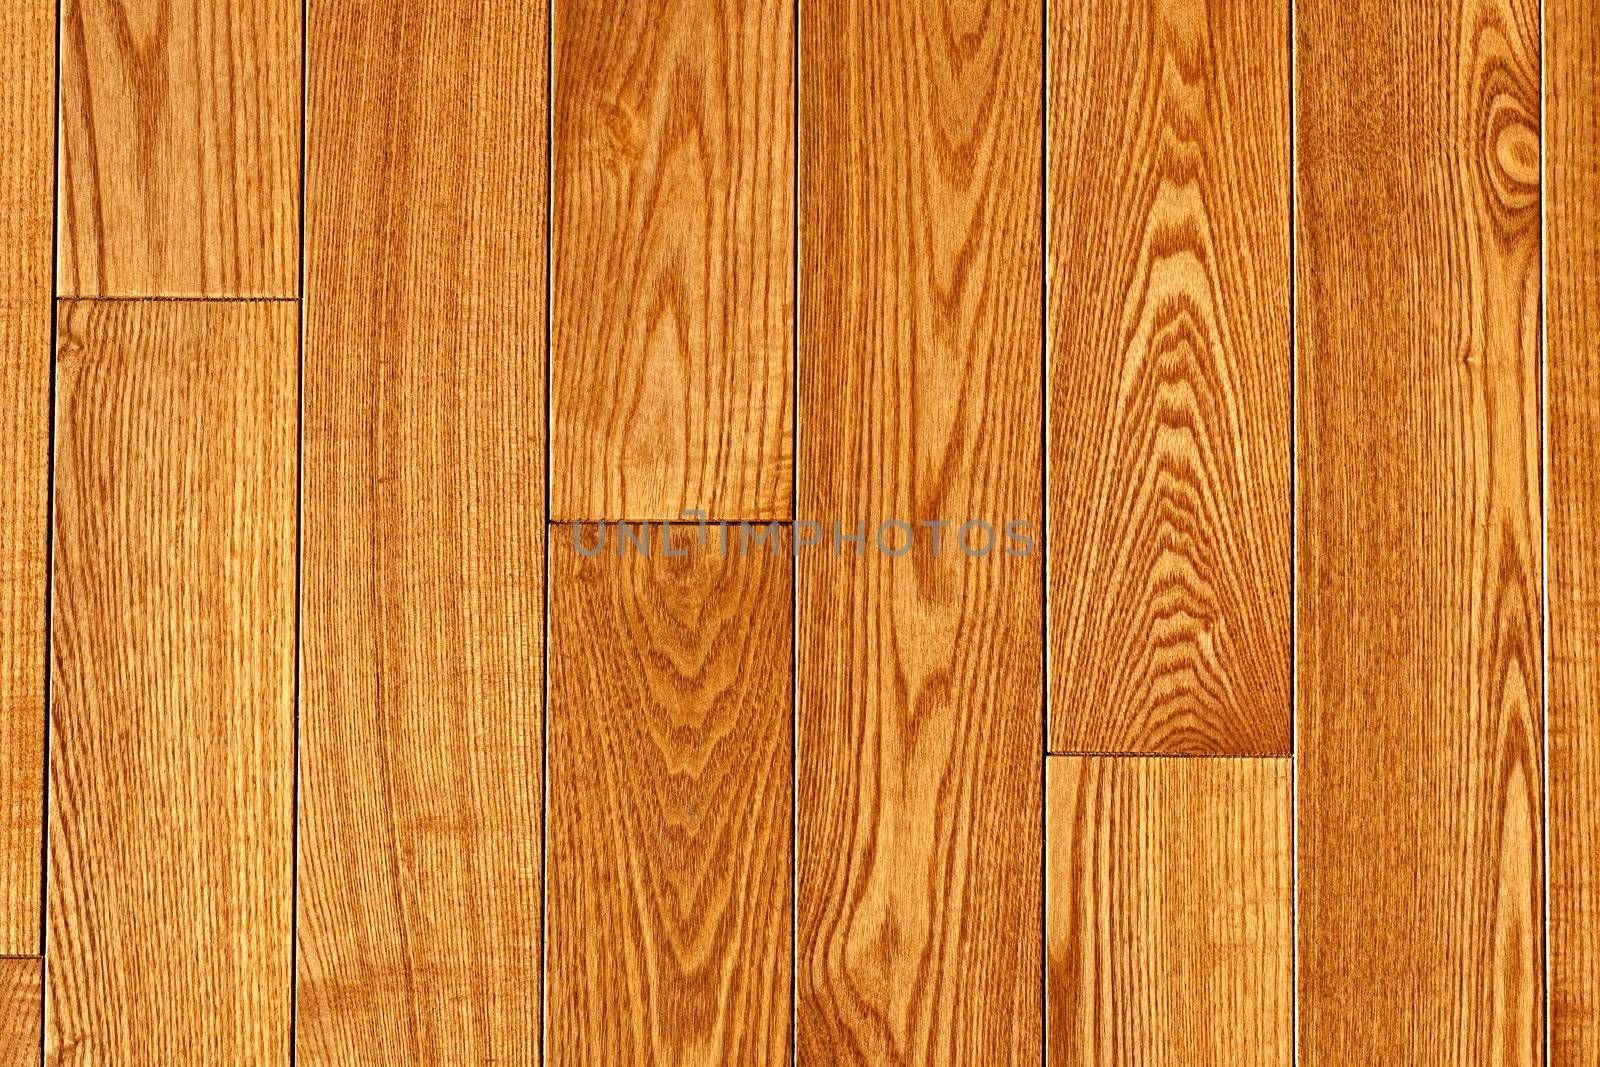 Hardwood oak floor boards view from above background